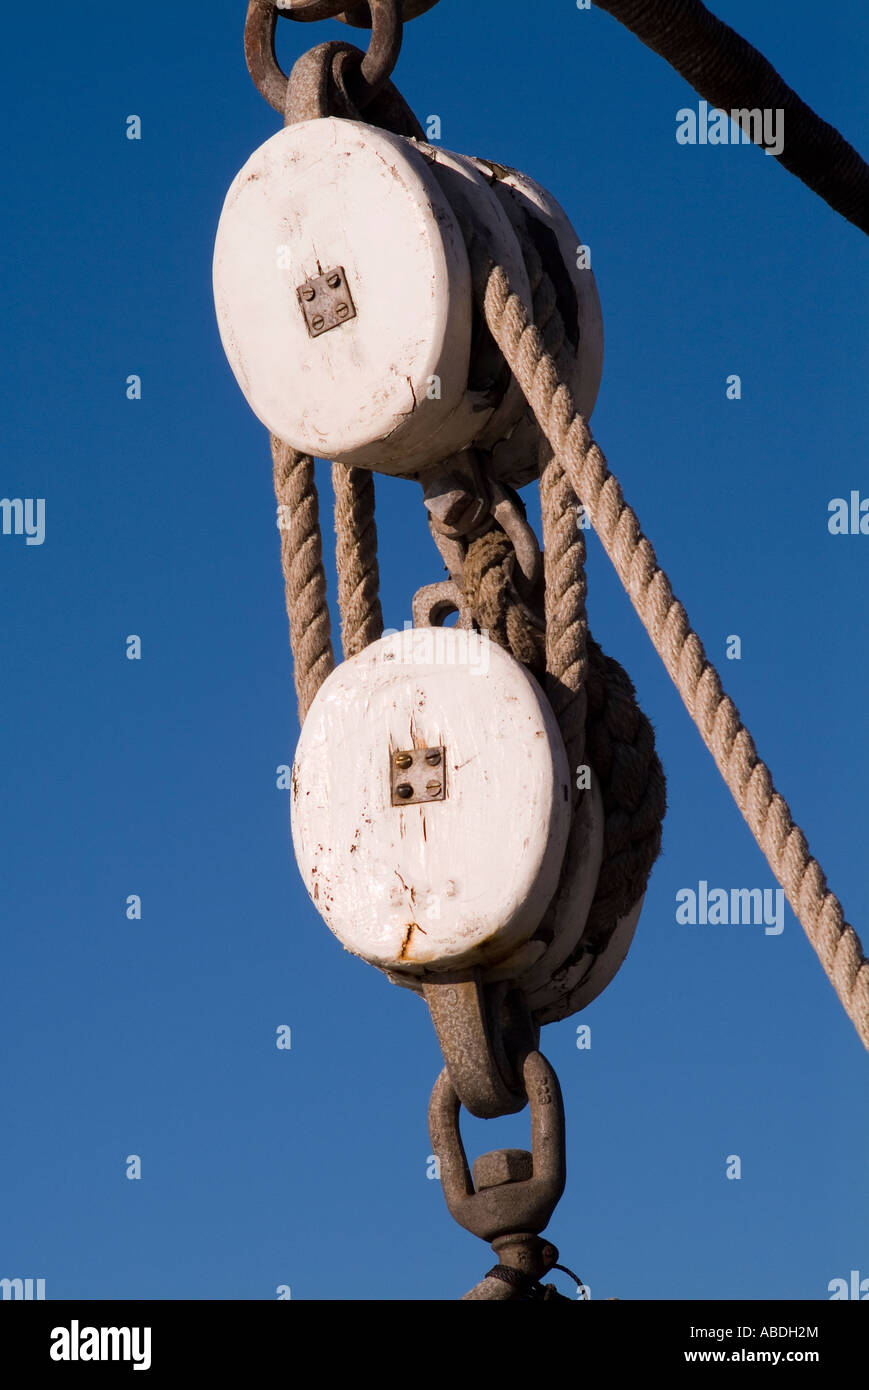 Heavy duty industrial pulley for maritime use Stock Photo